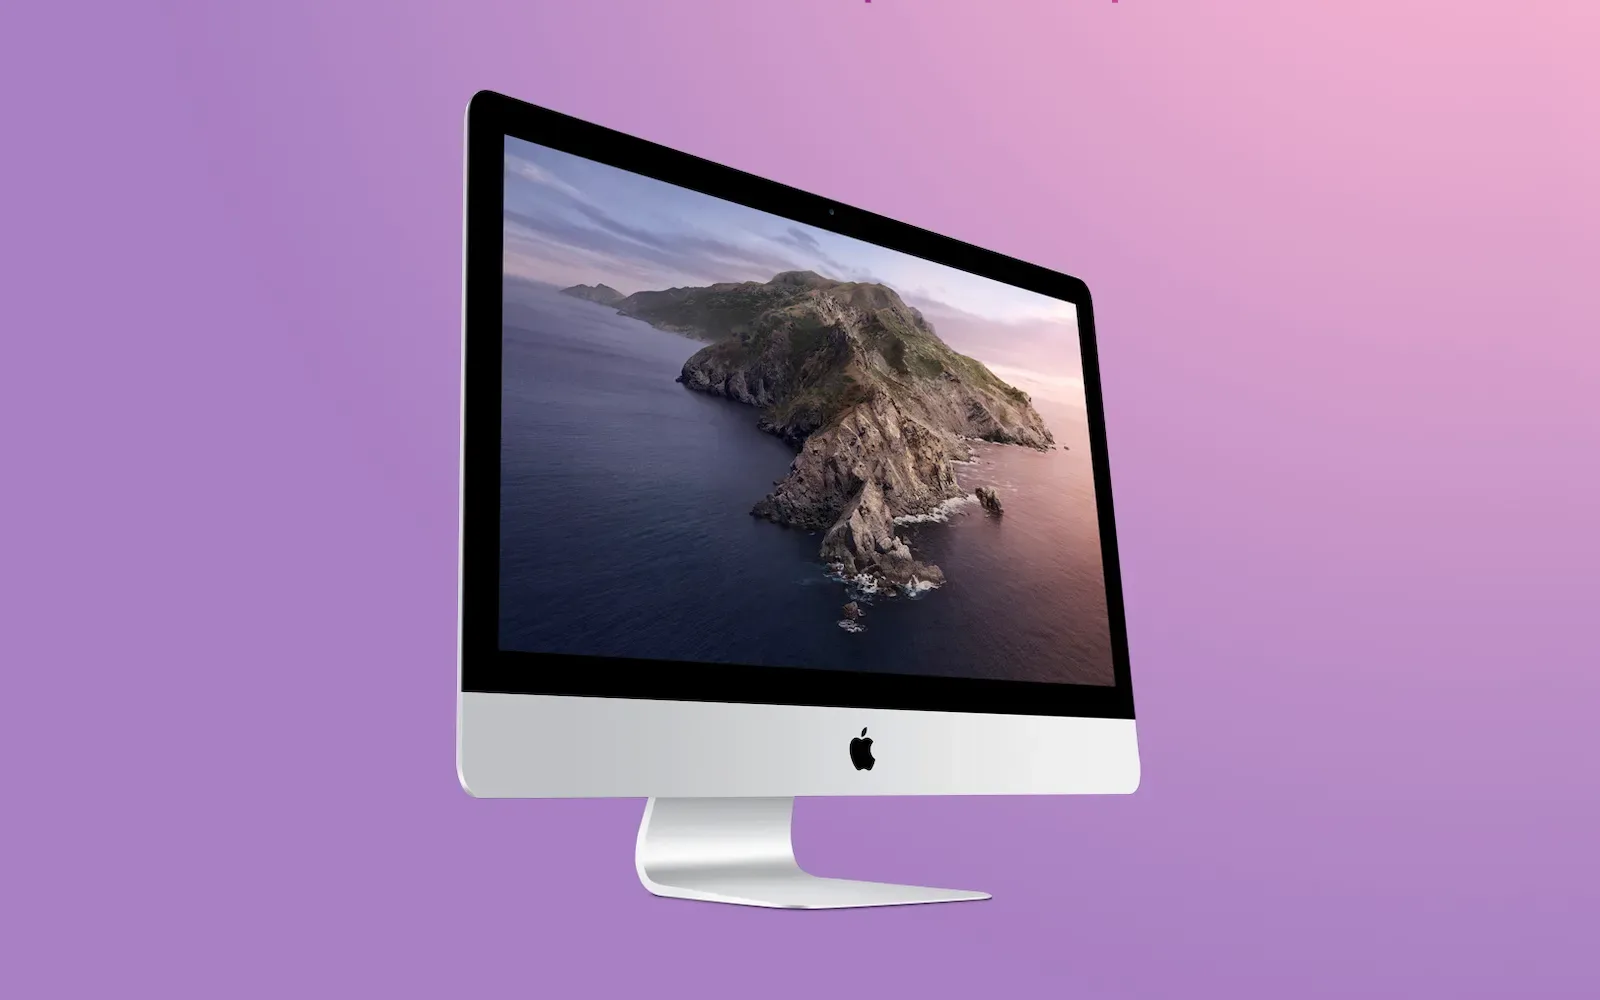 Image of a 27-inch iMac on a purple gradient background